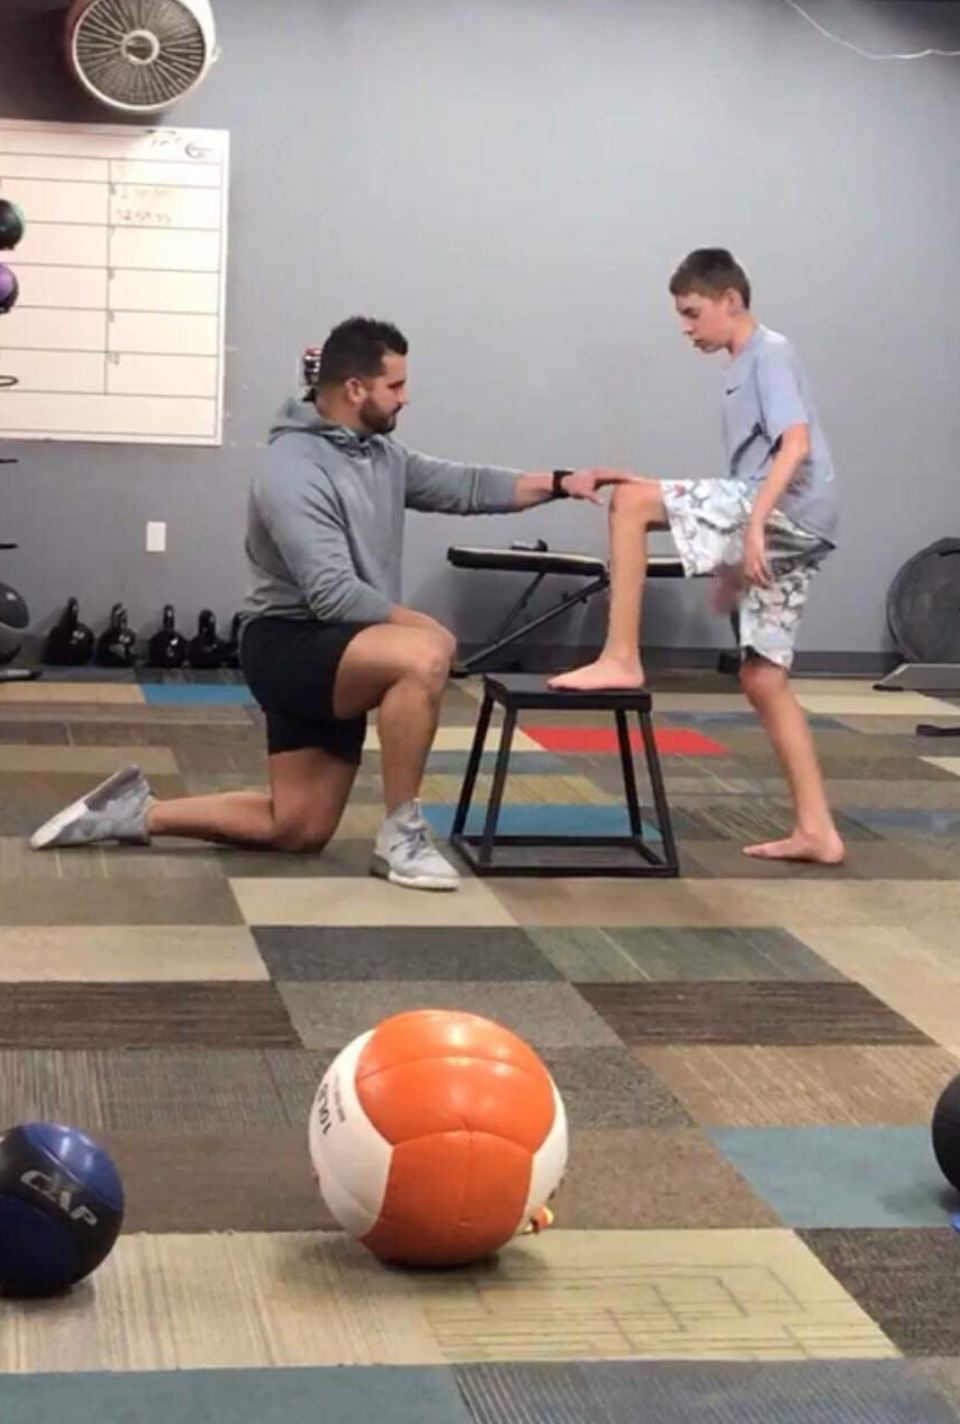 Clayton Rice assists a child with Cerebral Palsy with their physical therapy